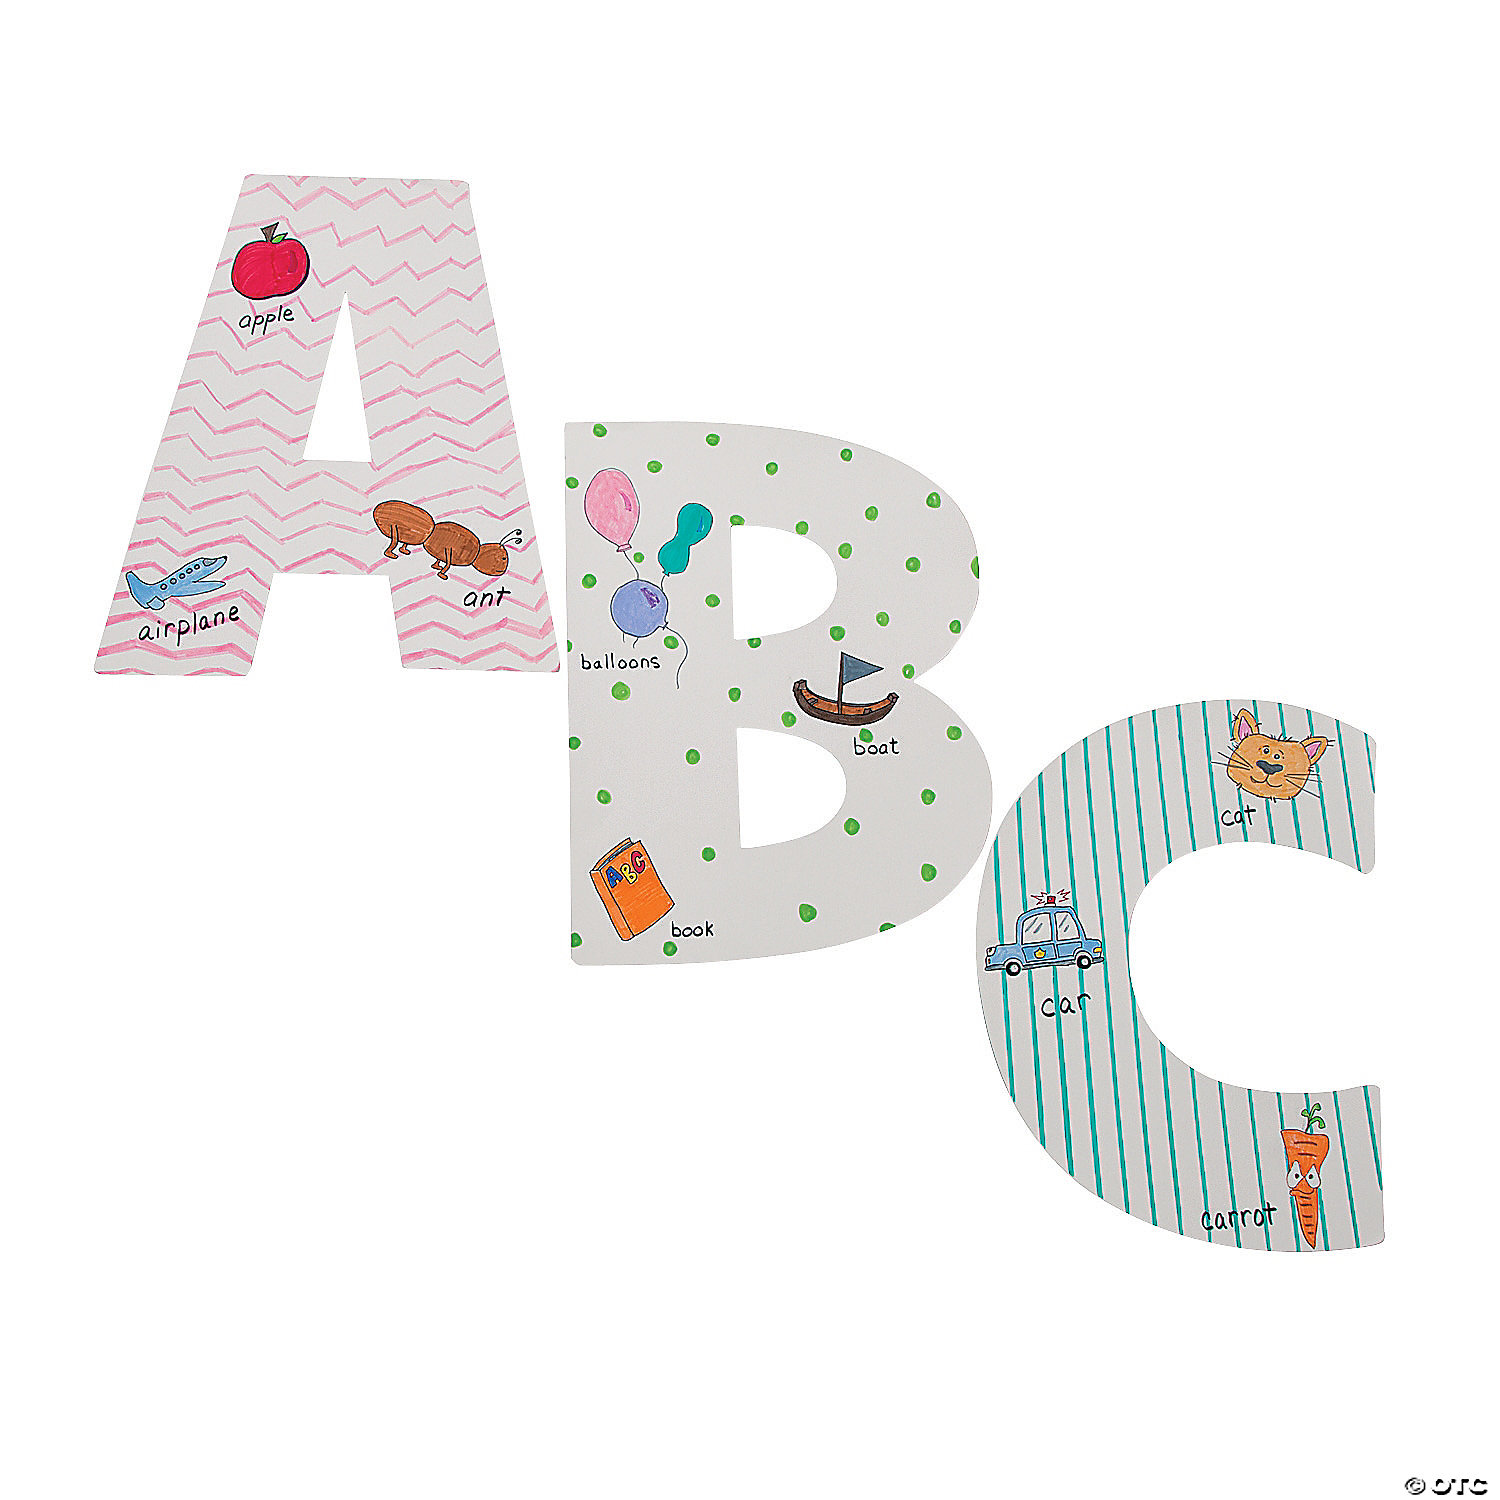 100 x 26 Alphabet Tile with White Silkscreen Number and Letter for Kid's Toy